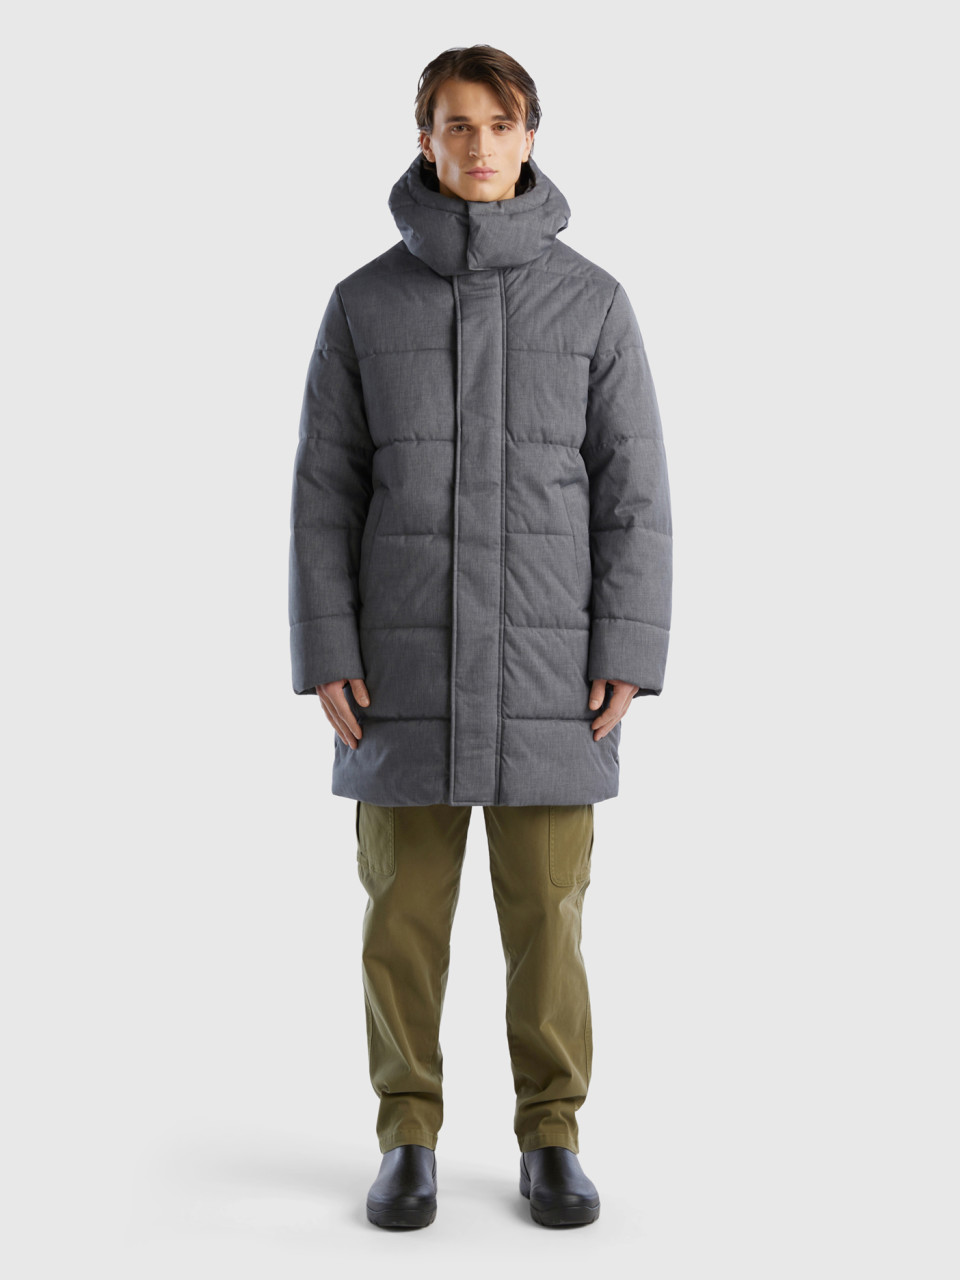 Benetton, Long Padded Jacket With Removable Hood, Gray, Men